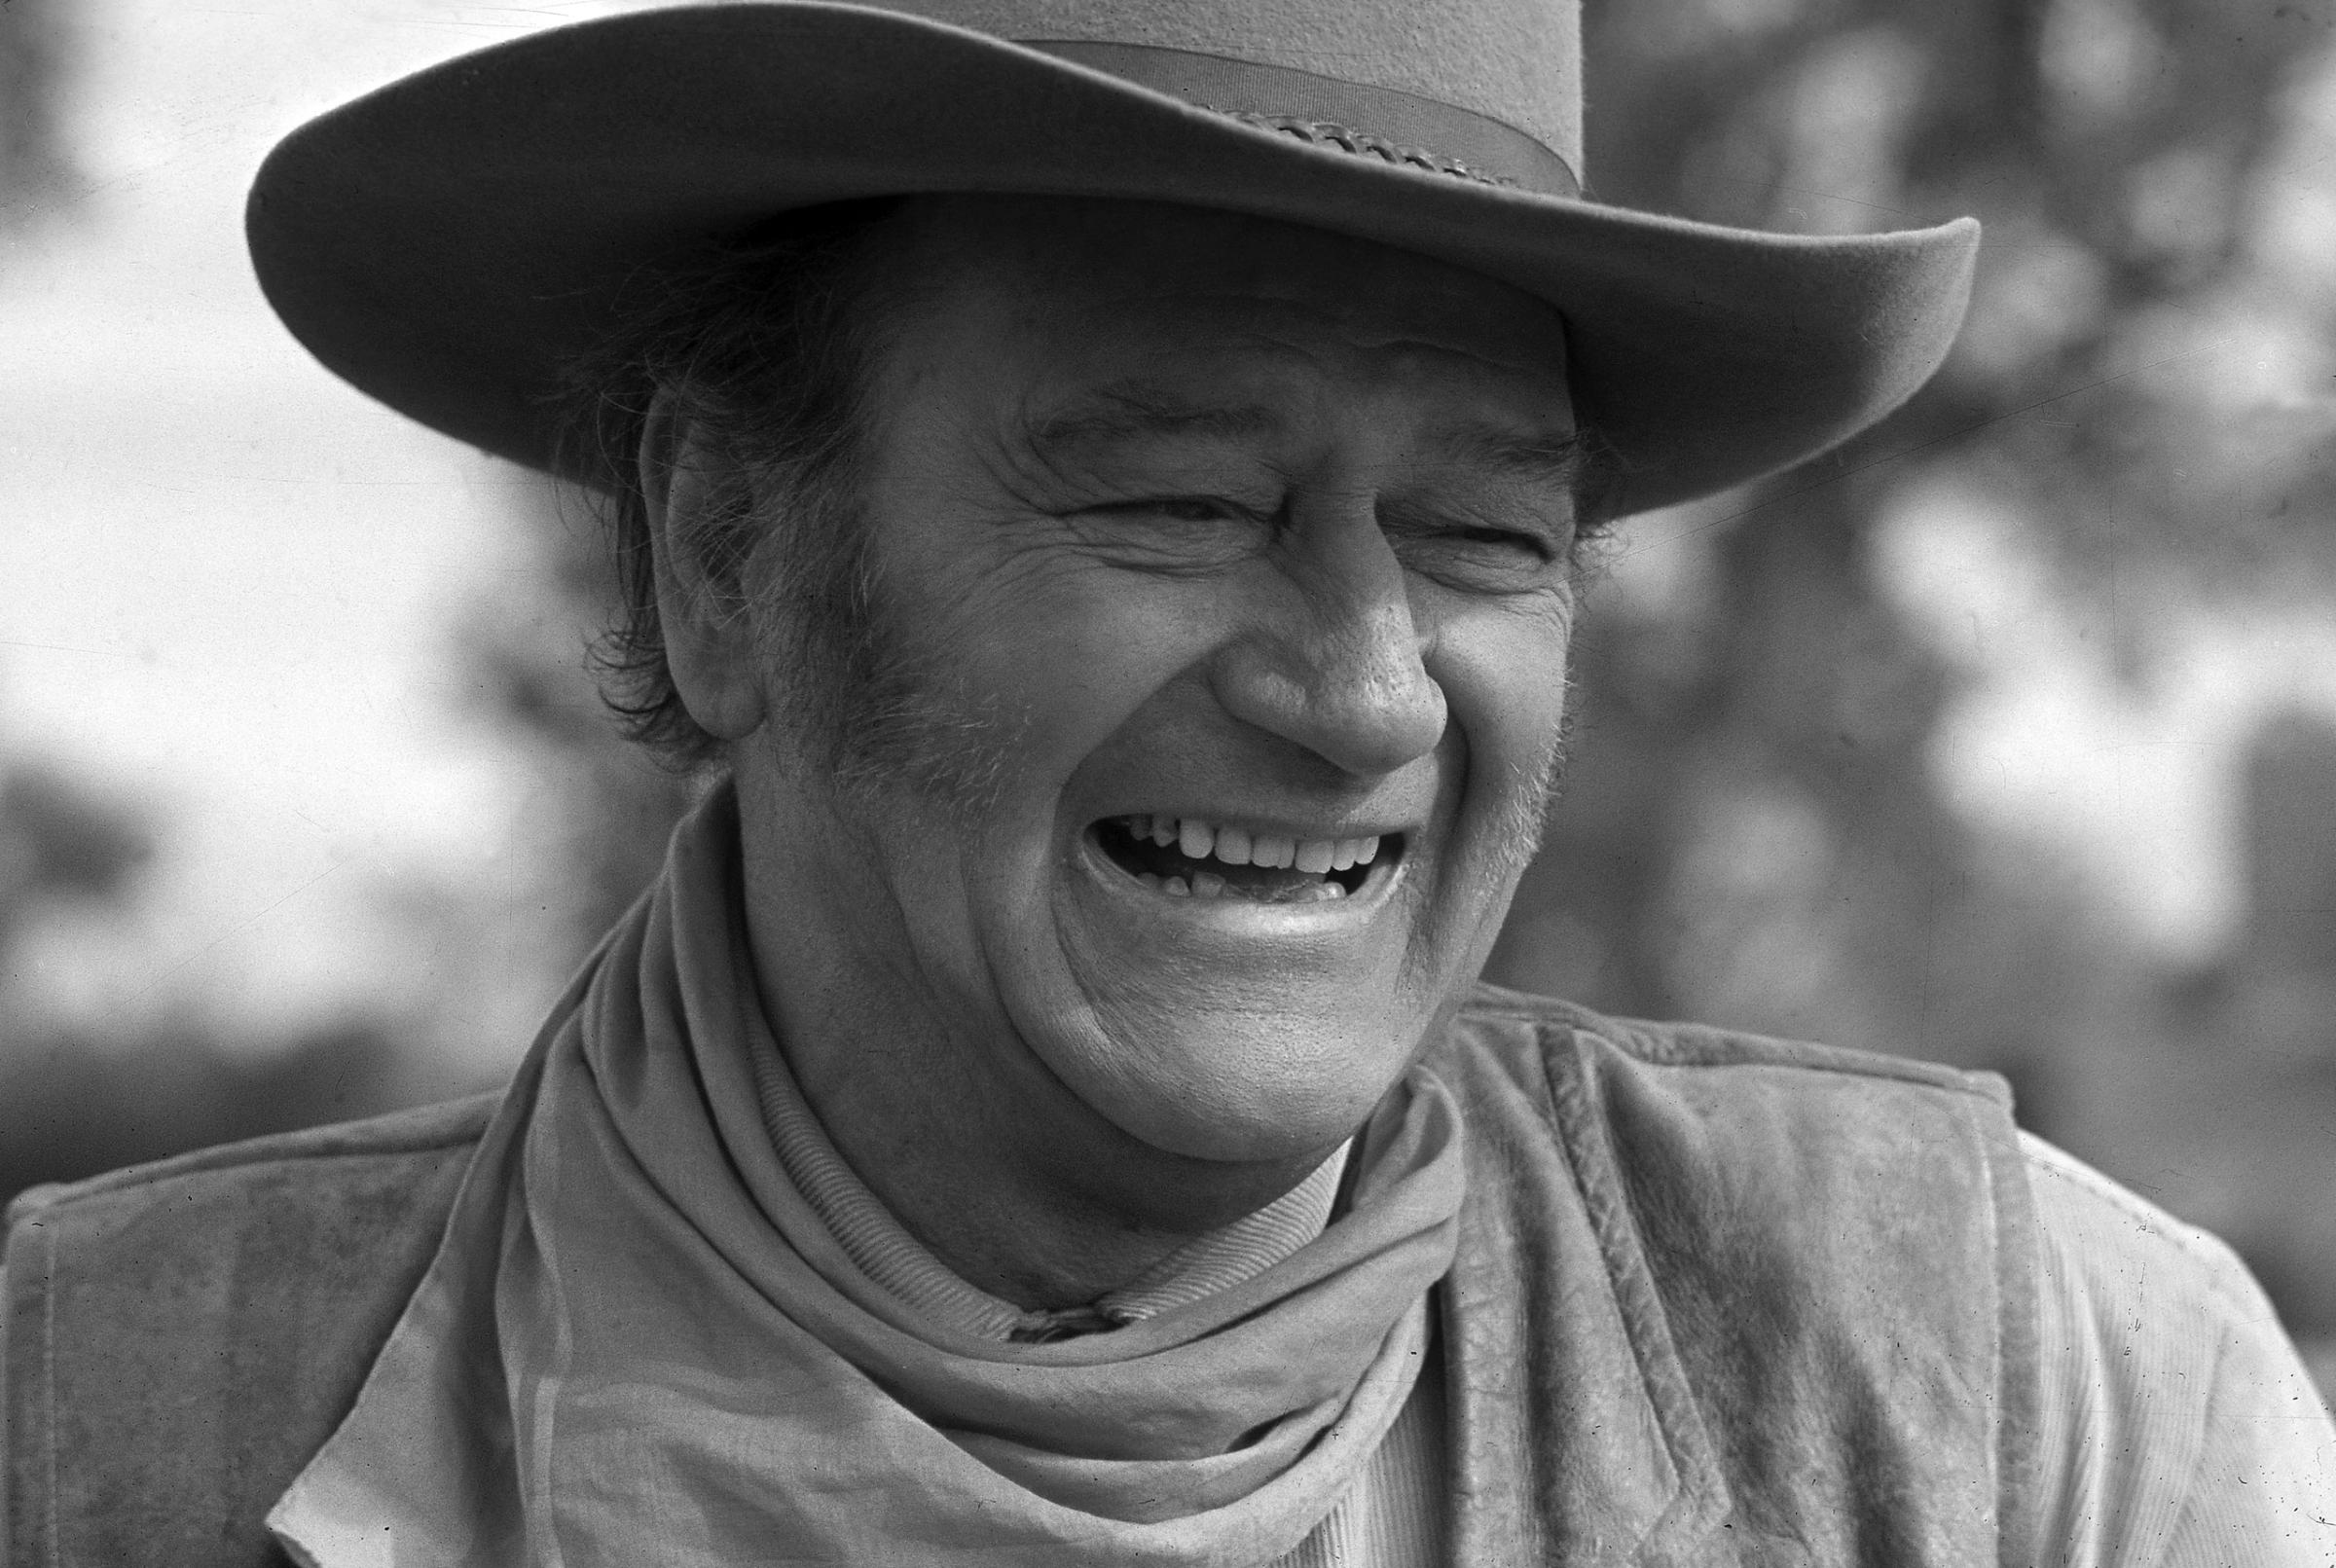 John Wayne in "The Undefeated" in 1969